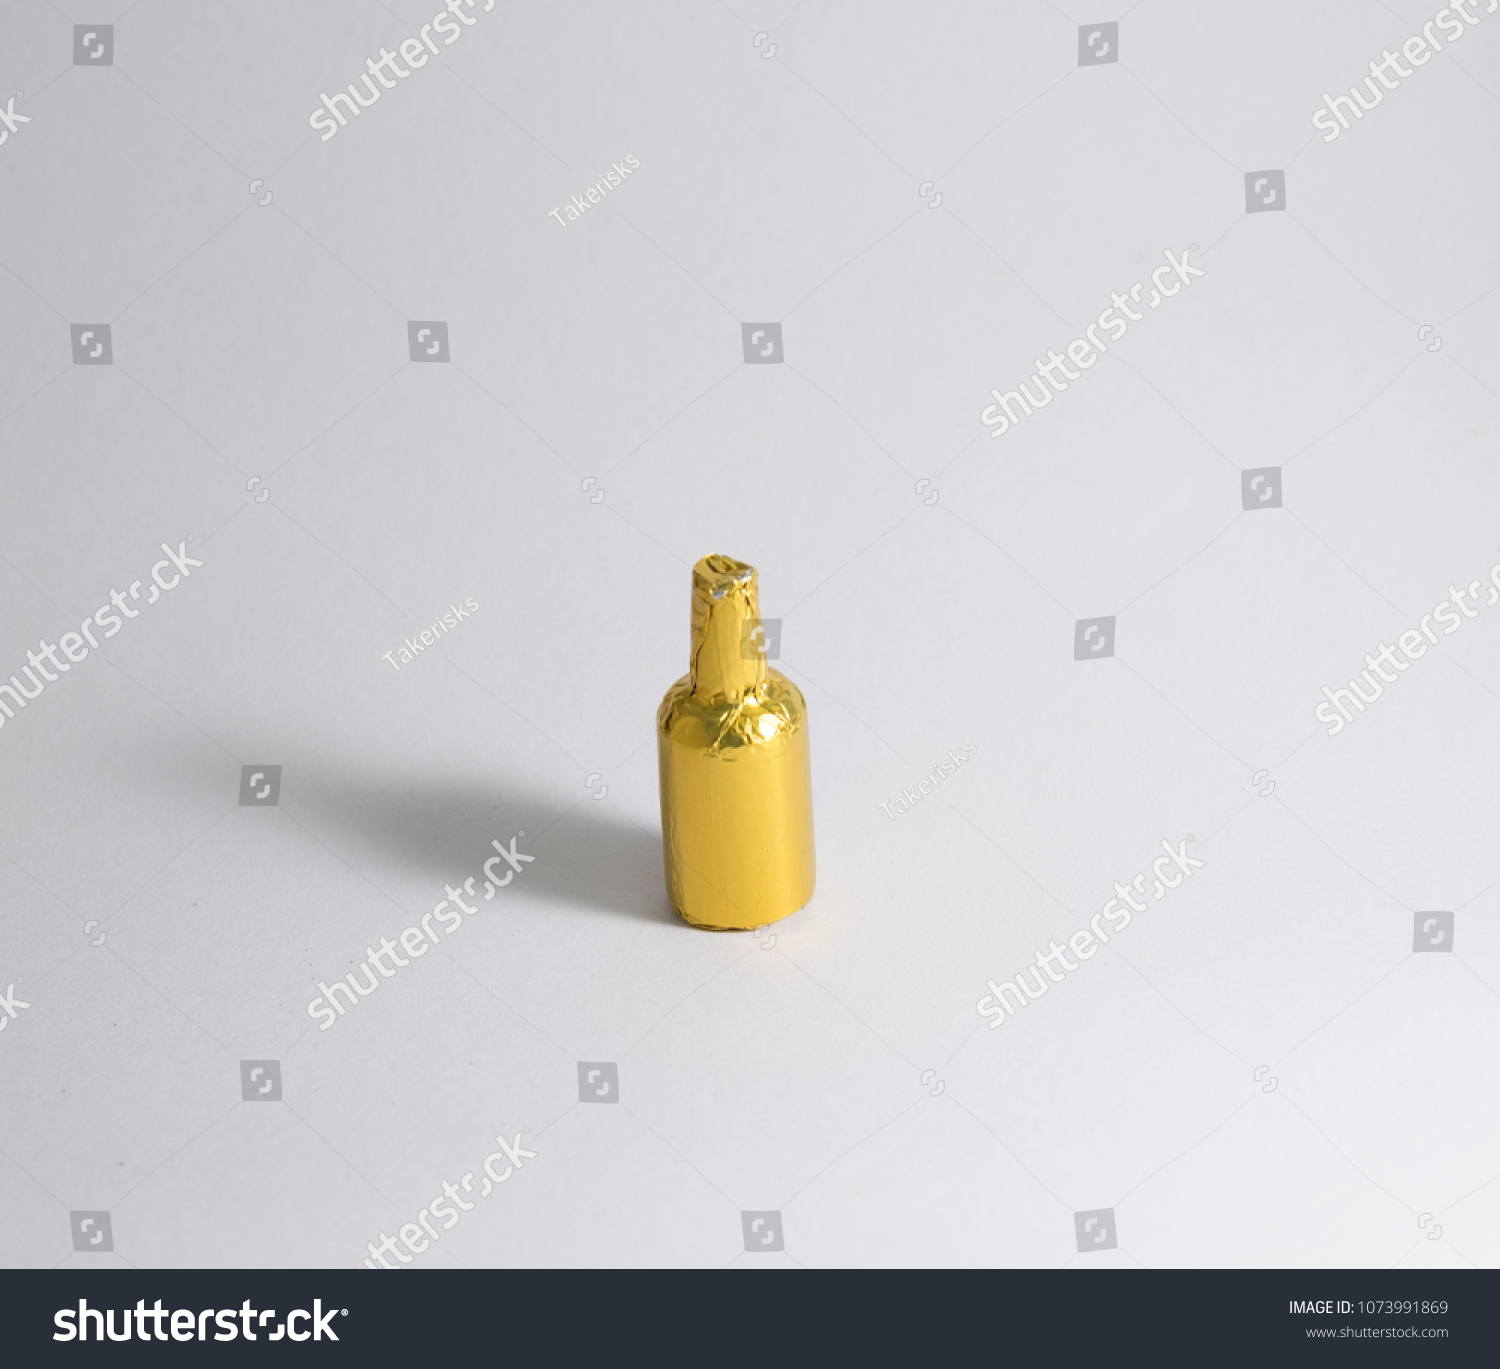 Download Liquor Bottles Wrapped Yellow Paper Stock Photo Edit Now 1073991869 PSD Mockup Templates